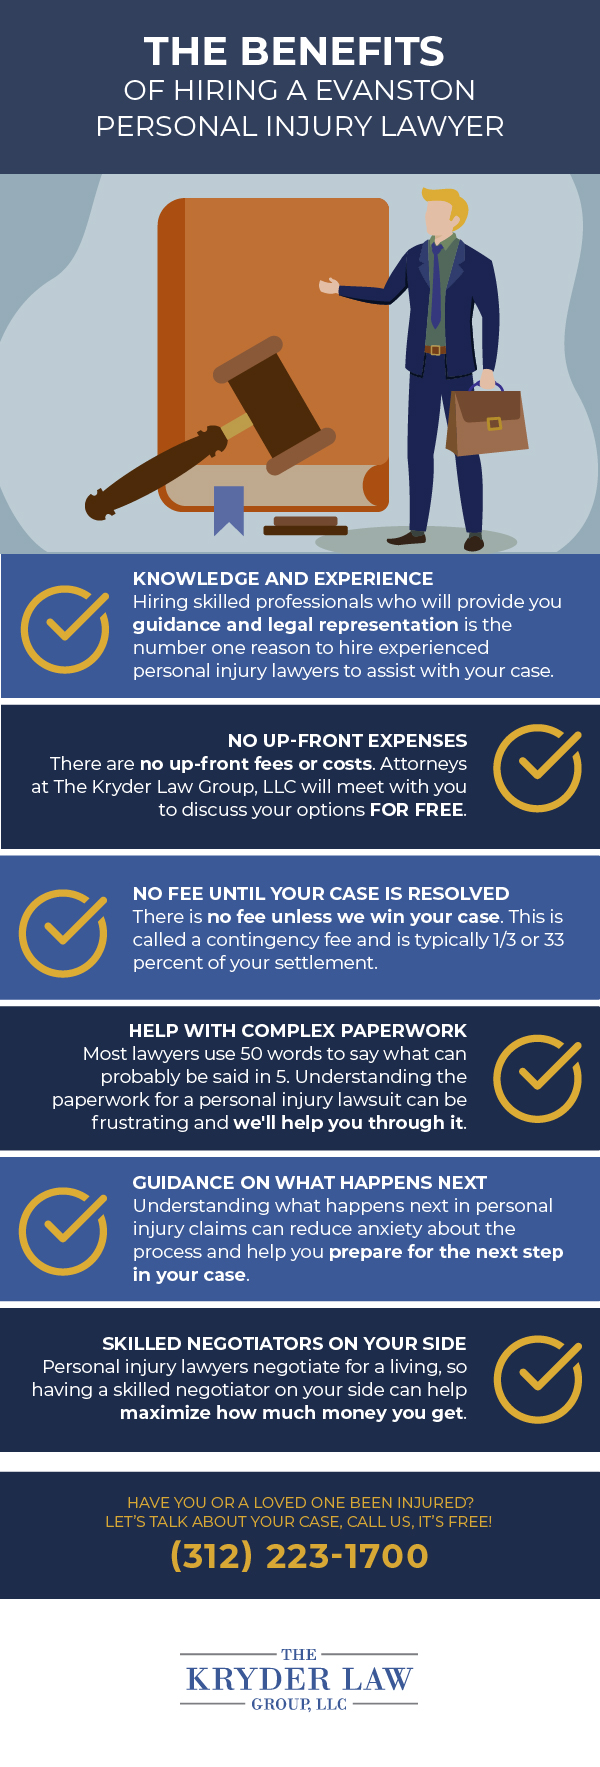 The Benefits of Hiring a Evanston Personal Injury Lawyer Infographic